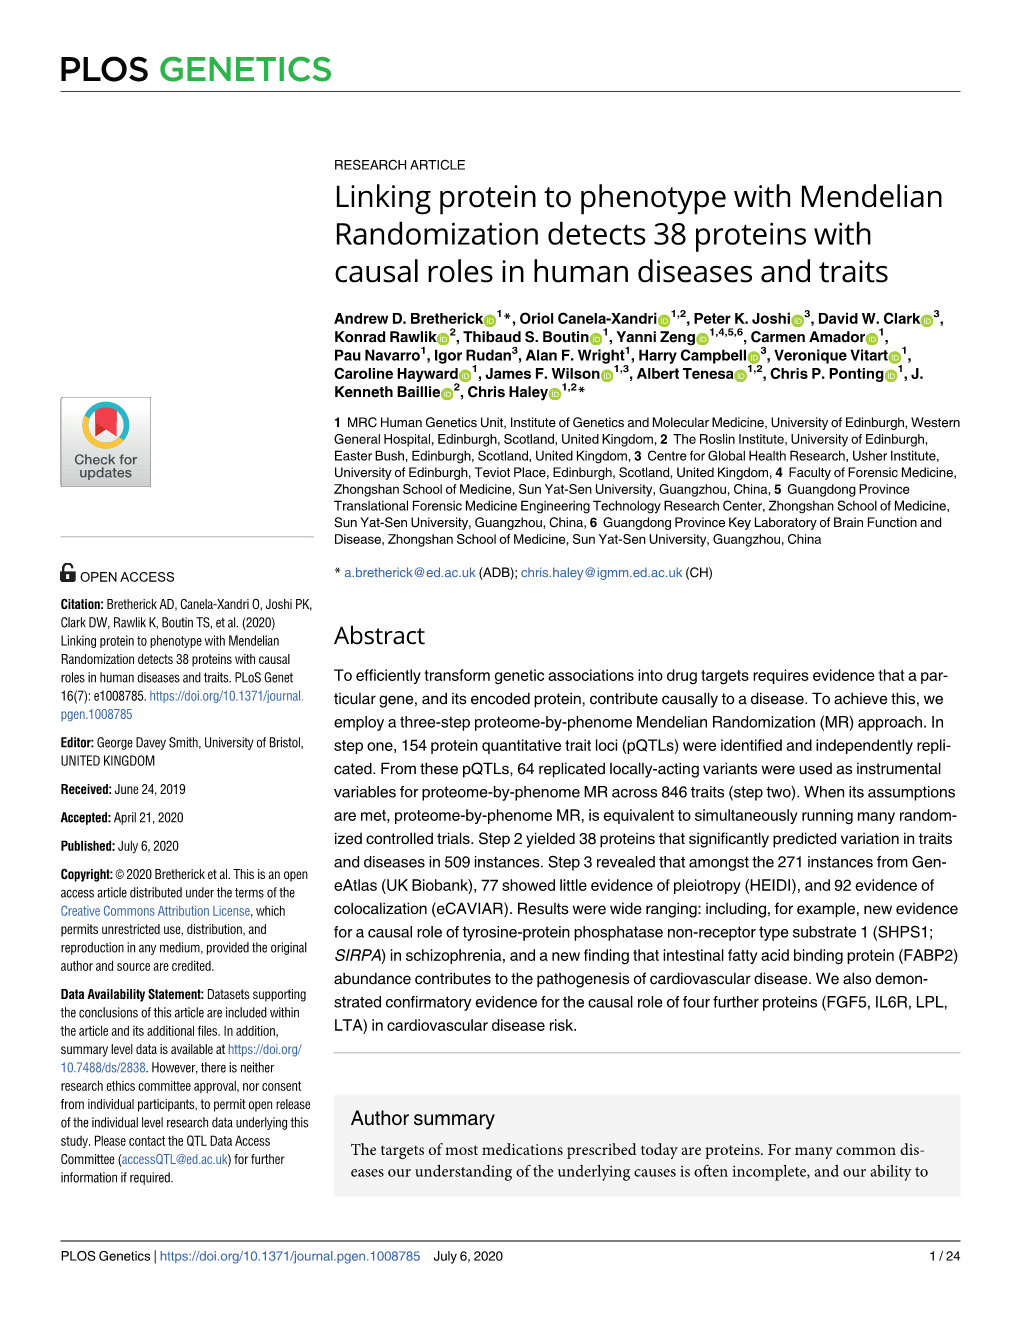 Linking Protein to Phenotype with Mendelian Randomization Detects 38 Proteins with Causal Roles in Human Diseases and Traits